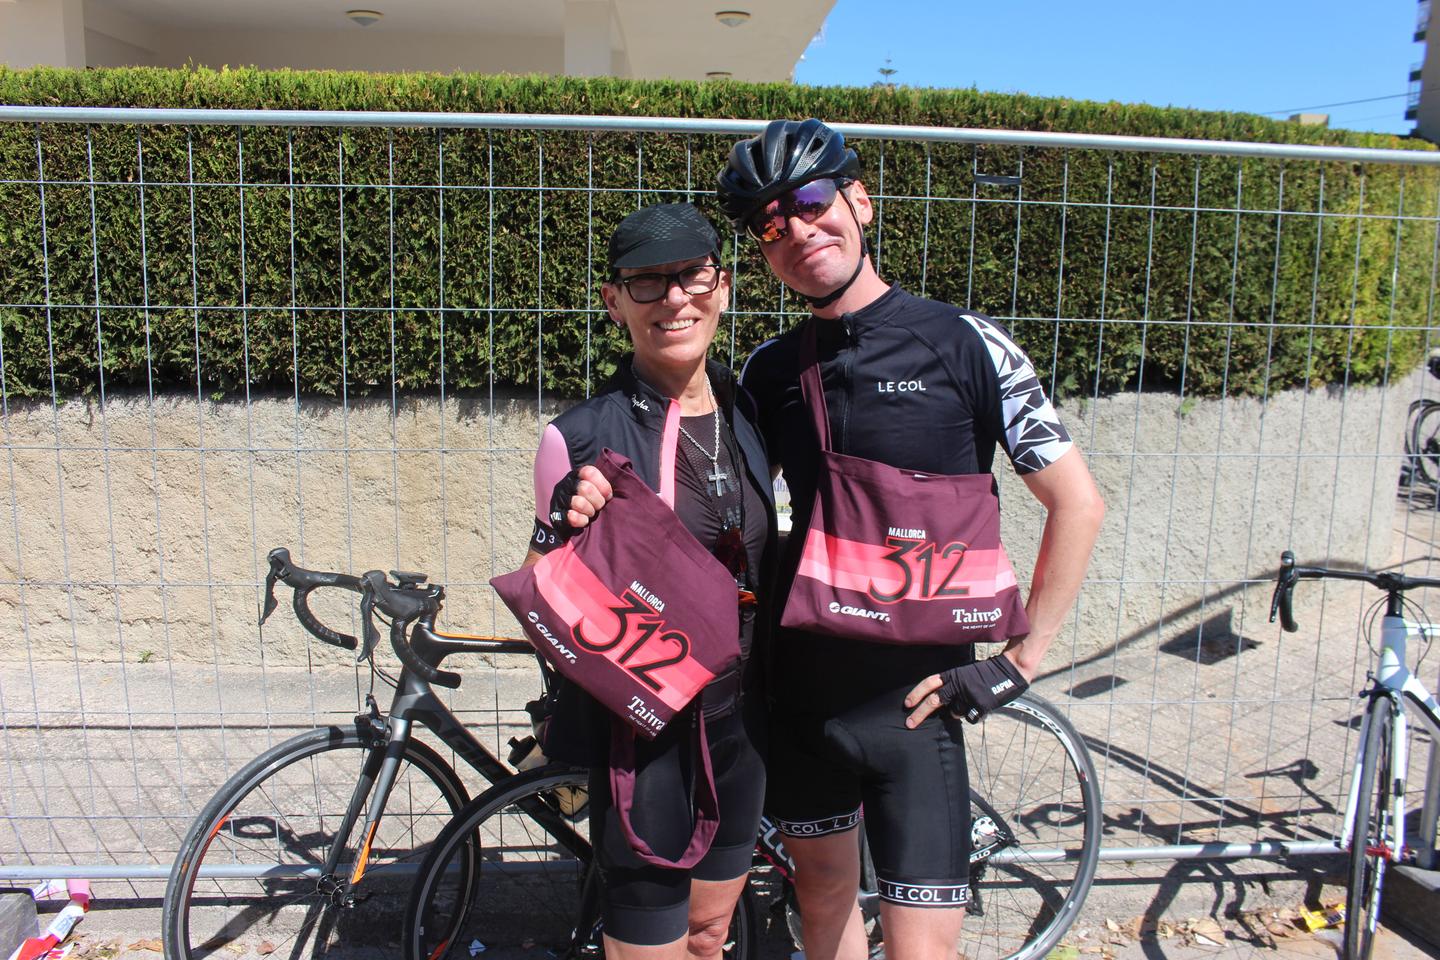 Two cyclists smiling and holding race bags at the Mallorca 312 event, standing in front of a fence with their bicycles nearby